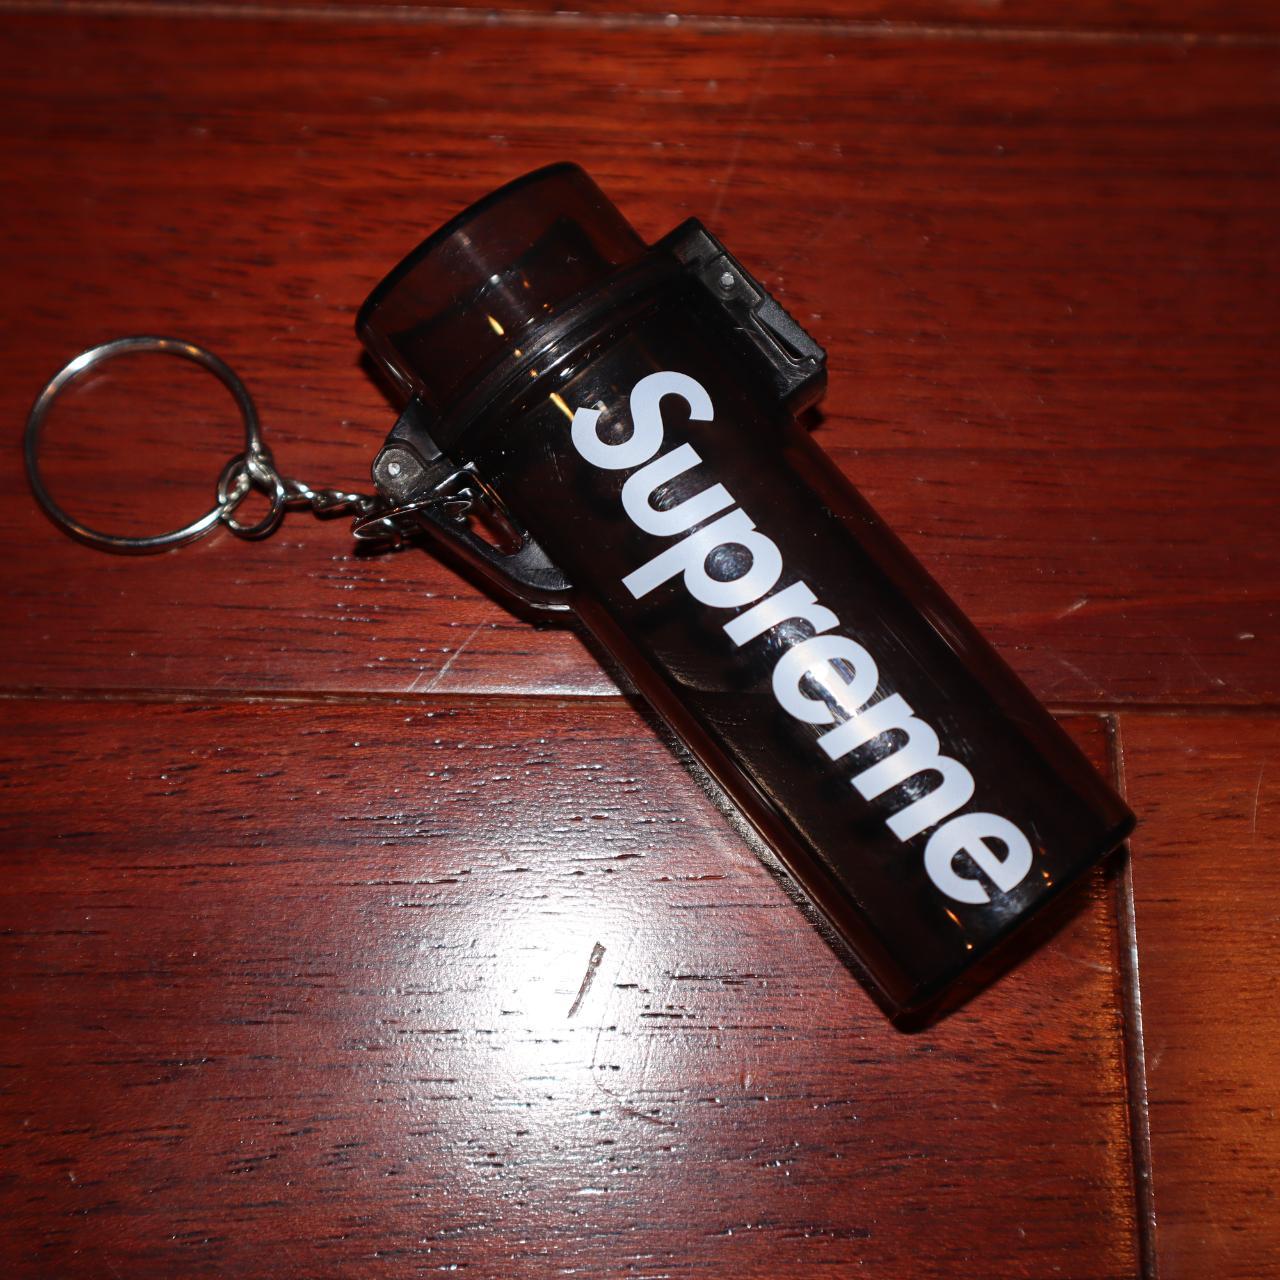 Supreme Waterproof Lighter Case Keychain Red - SS20 - US